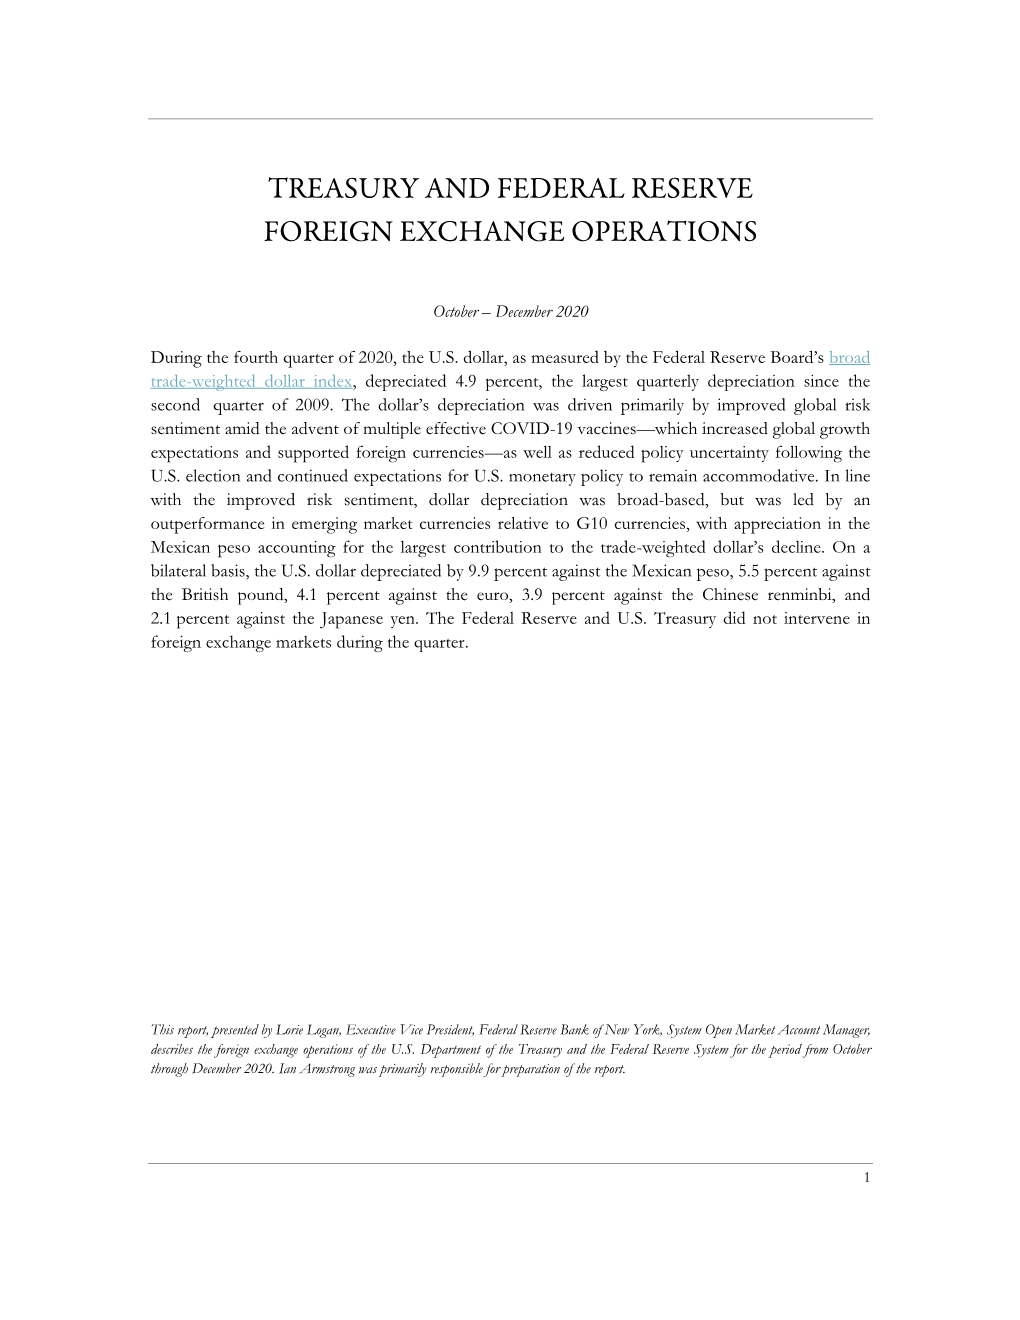 Treasury and Federal Reserve Foreign Exchange Operations